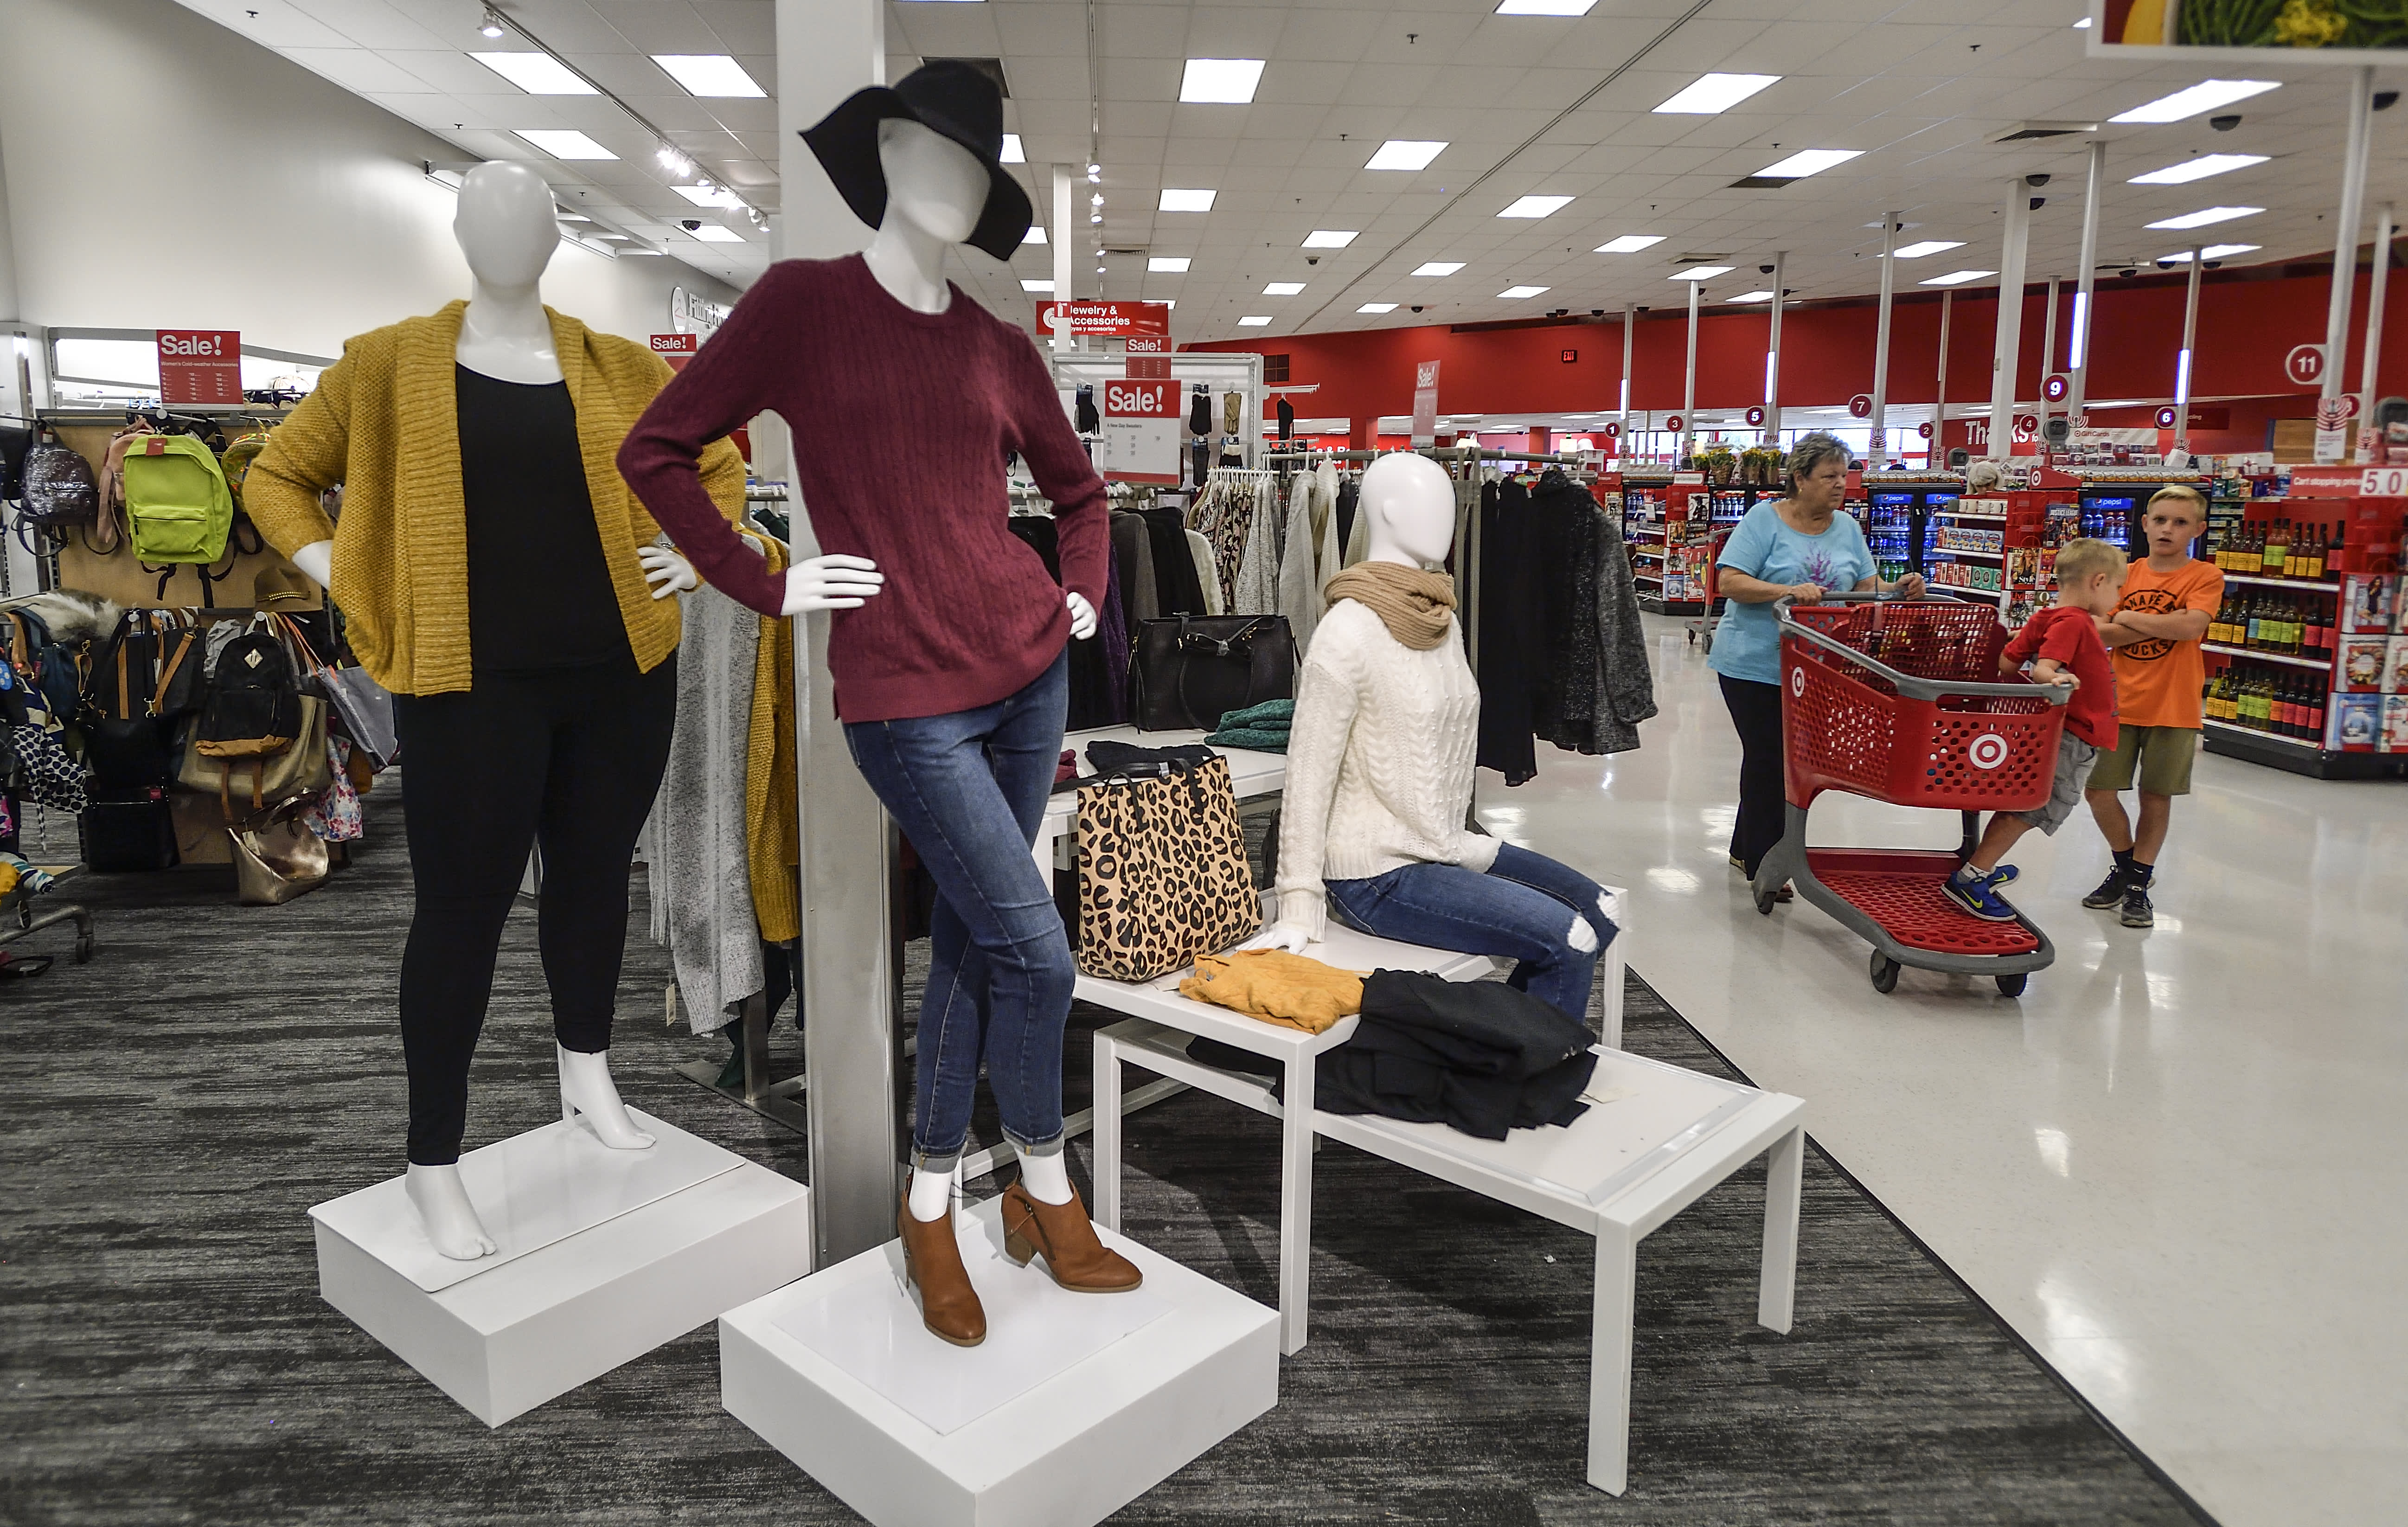 Target is taking the market share in women's clothing that Kohl's